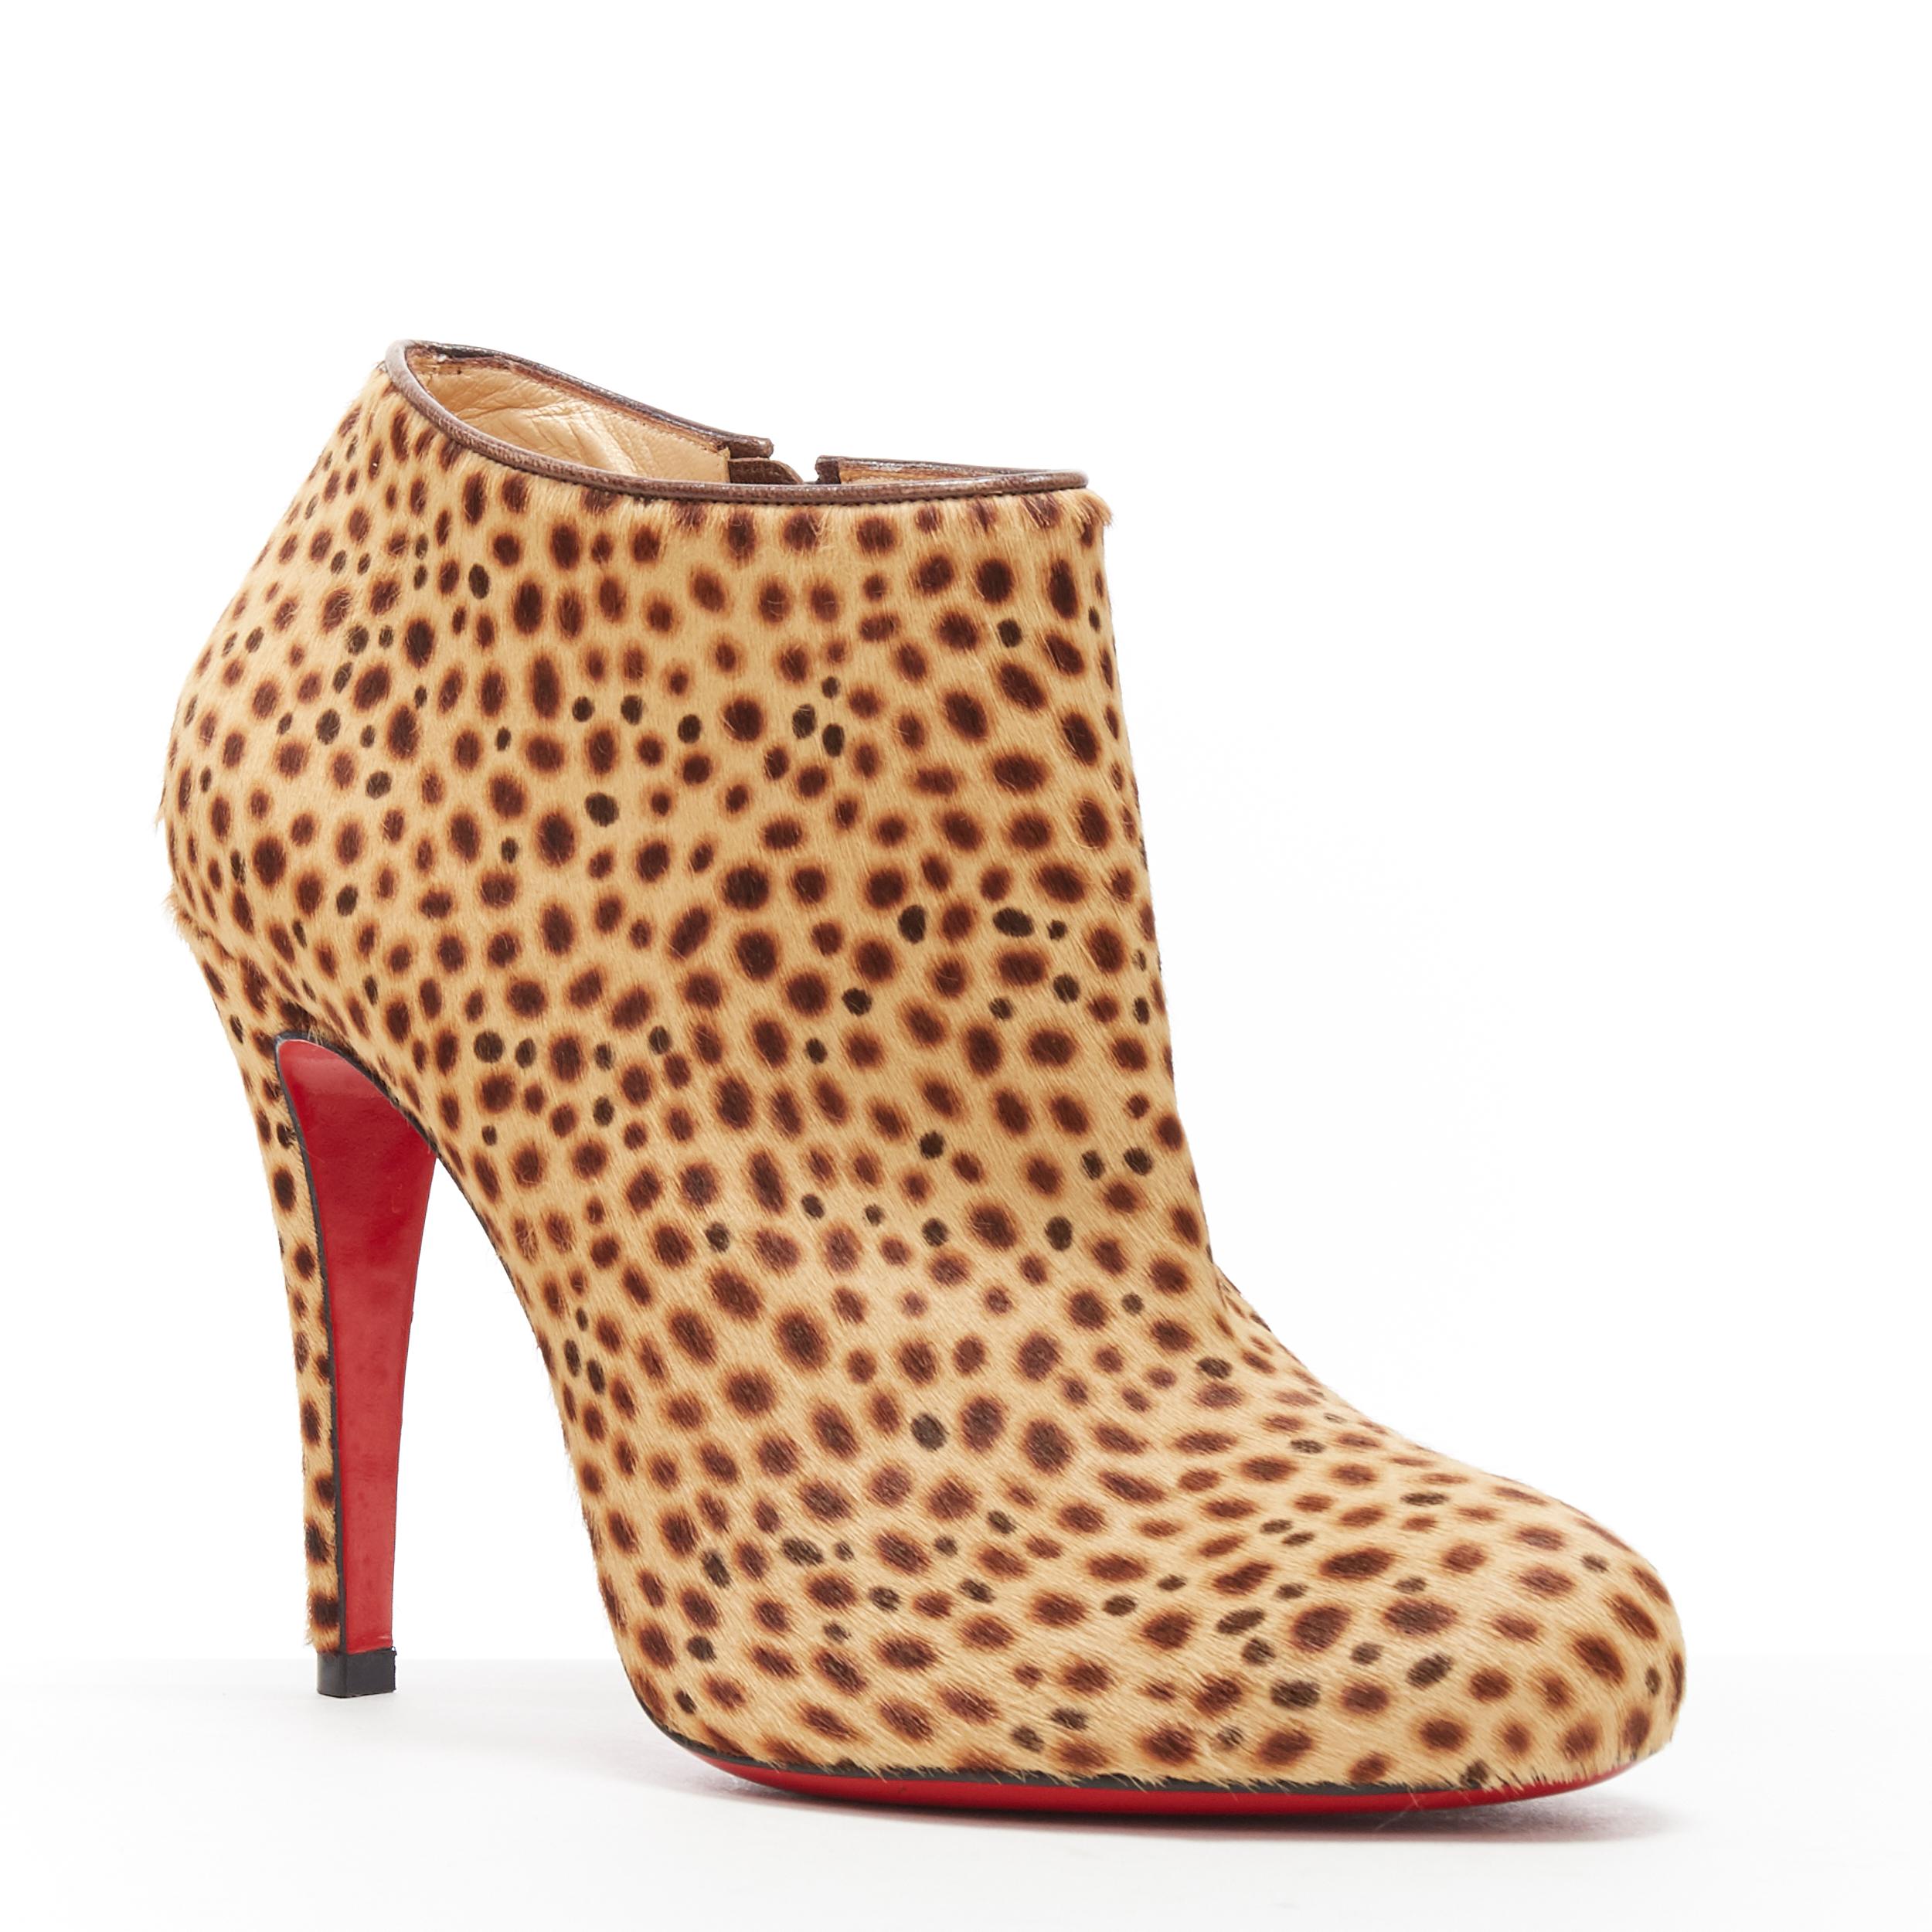 CHRISTIAN LOUBOUTIN brown cheetah spot print round toe heeled ankle bootie EU38
Brand: Christian Louboutin
Designer: Christian Louboutin
Model Name / Style: Ankle boot
Material: Leather; pony hair
Color: Brown
Pattern: Animal Print
Closure: